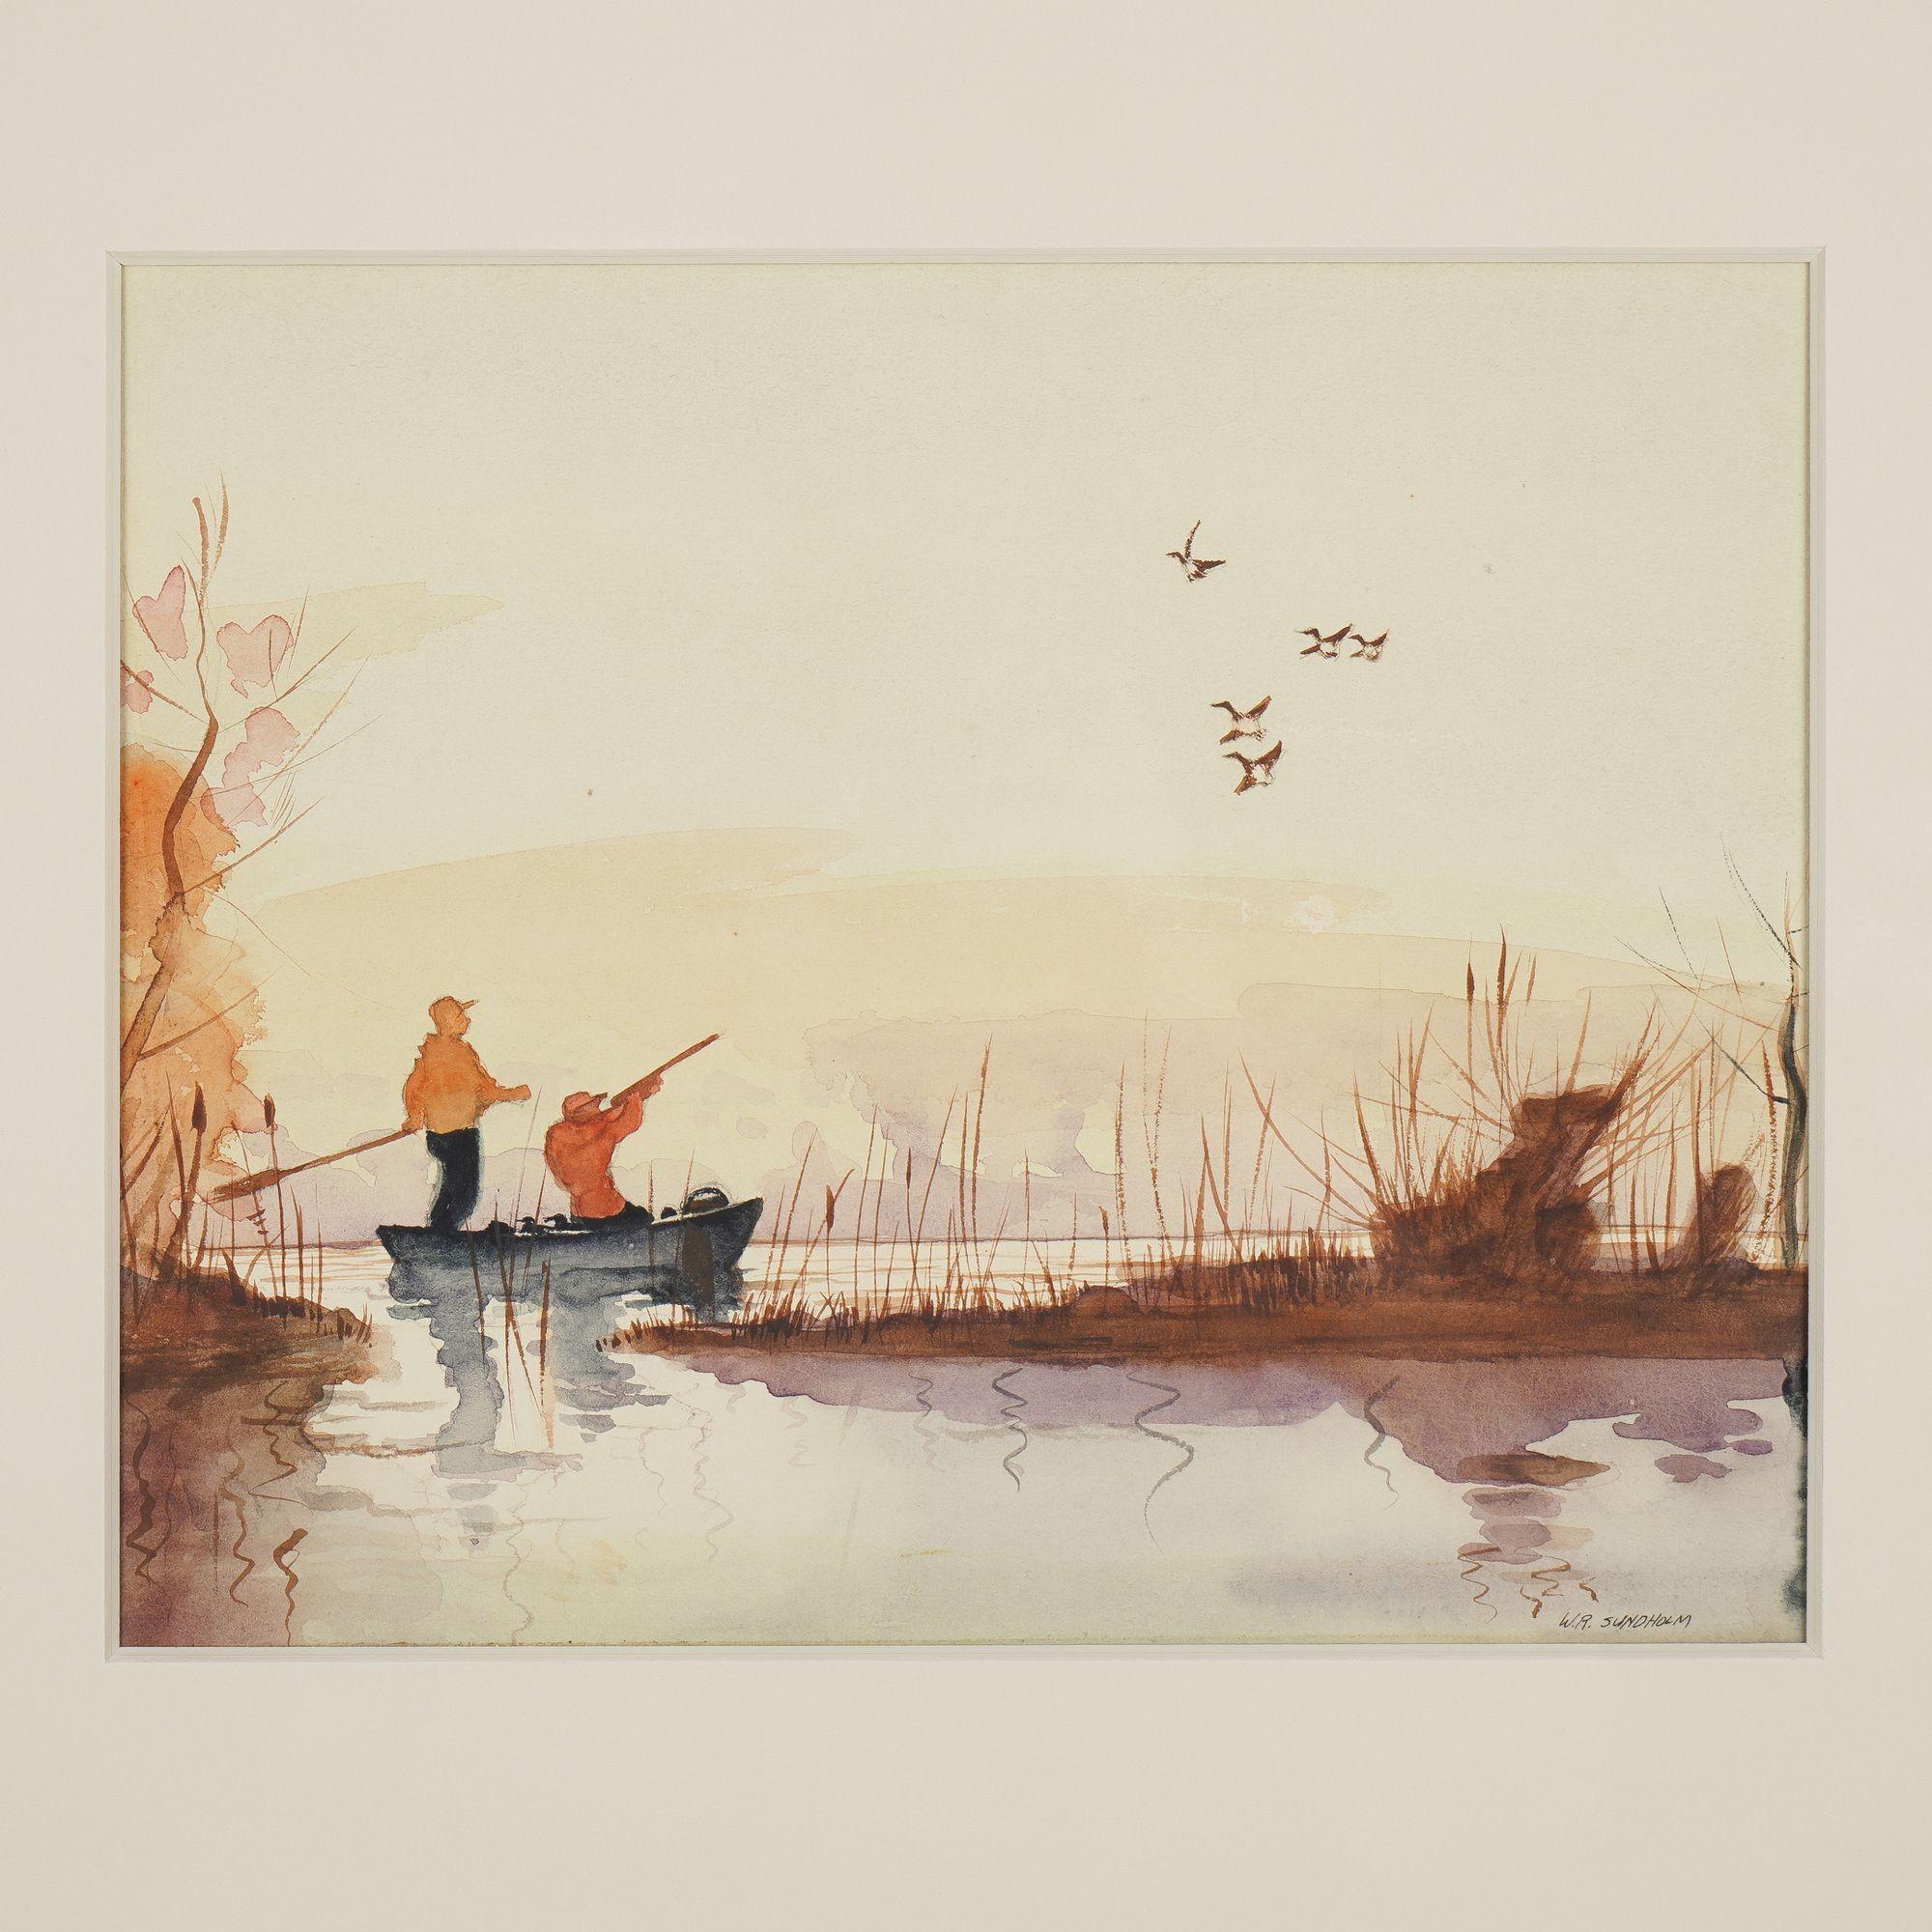 Watercolor on paper of two duck hunters on a punt. The composition features a marshy bankside in the foreground, along with beautifully rendered reflections in the water. In the background, we see clouds or mist rising from the water, and above the